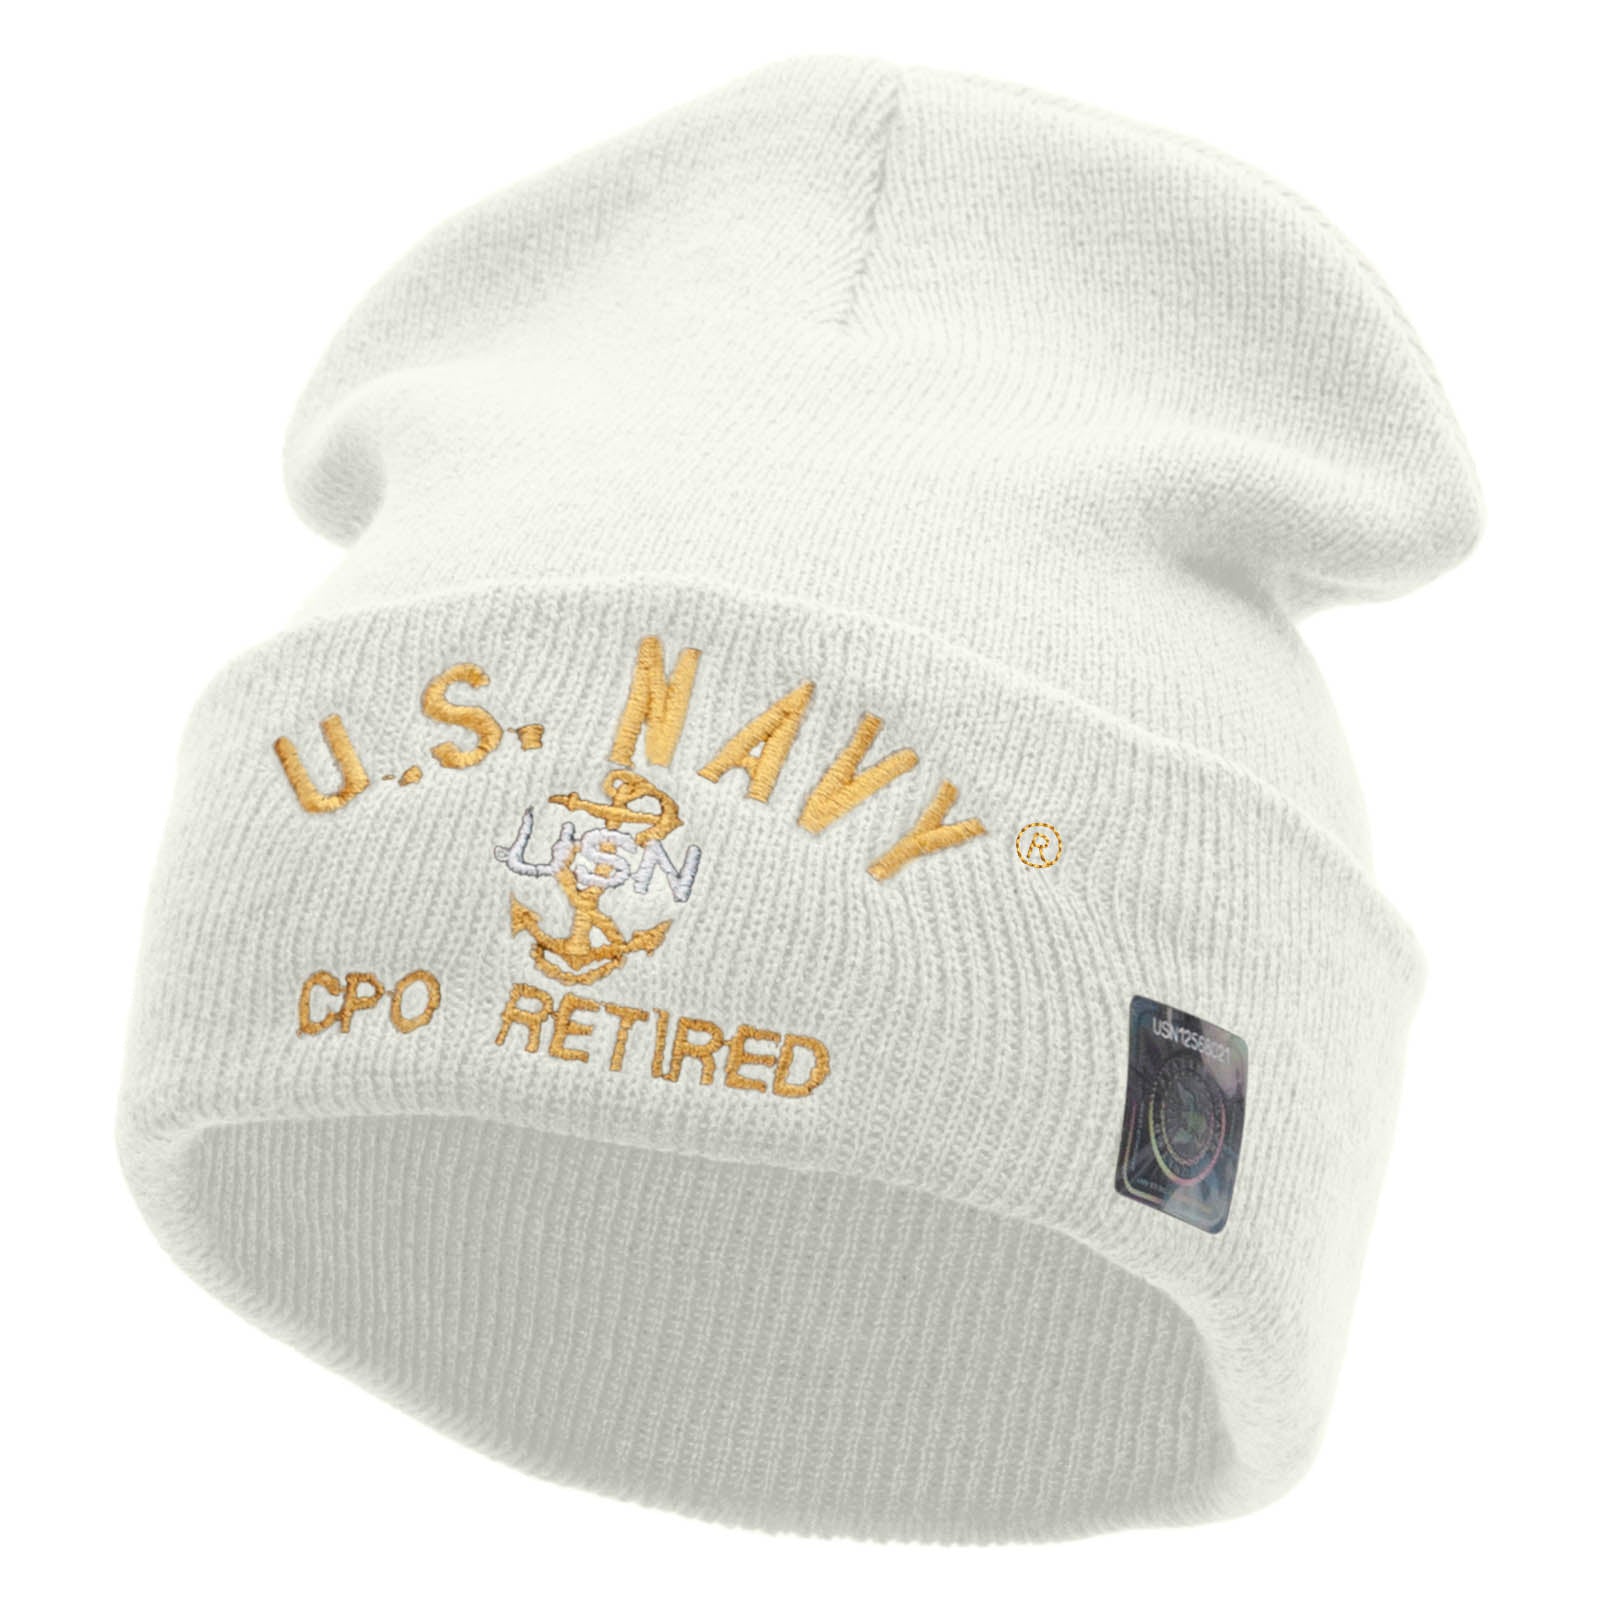 Licensed US Navy CPO Retired Military Embroidered Long Beanie Made in USA - White OSFM